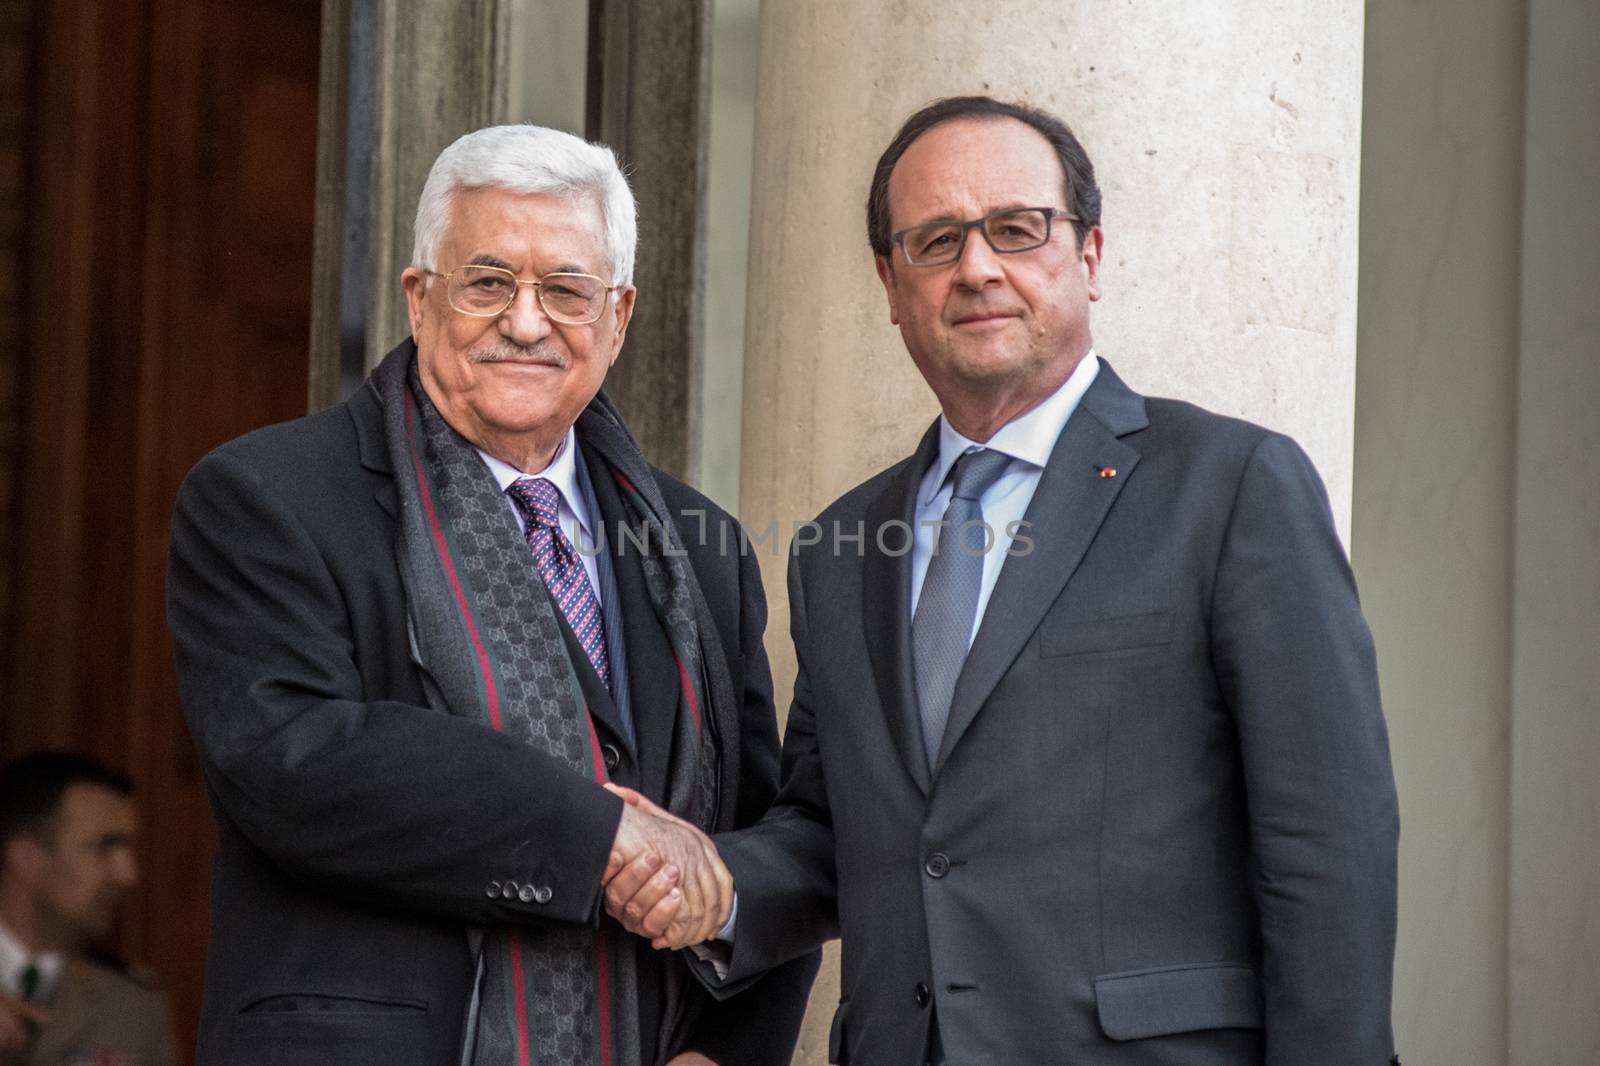 FRANCE, Paris : French President Francois Hollande (R) shakes hands with Palestinian president Mahmud Abbas (L) before their meeting at the Elysee Palace in Paris on April 16, 2016. Palestinian president Mahmud Abbas holds talks with French President Francois Hollande during his international tour seeking a UN resolution on Israeli settlements.